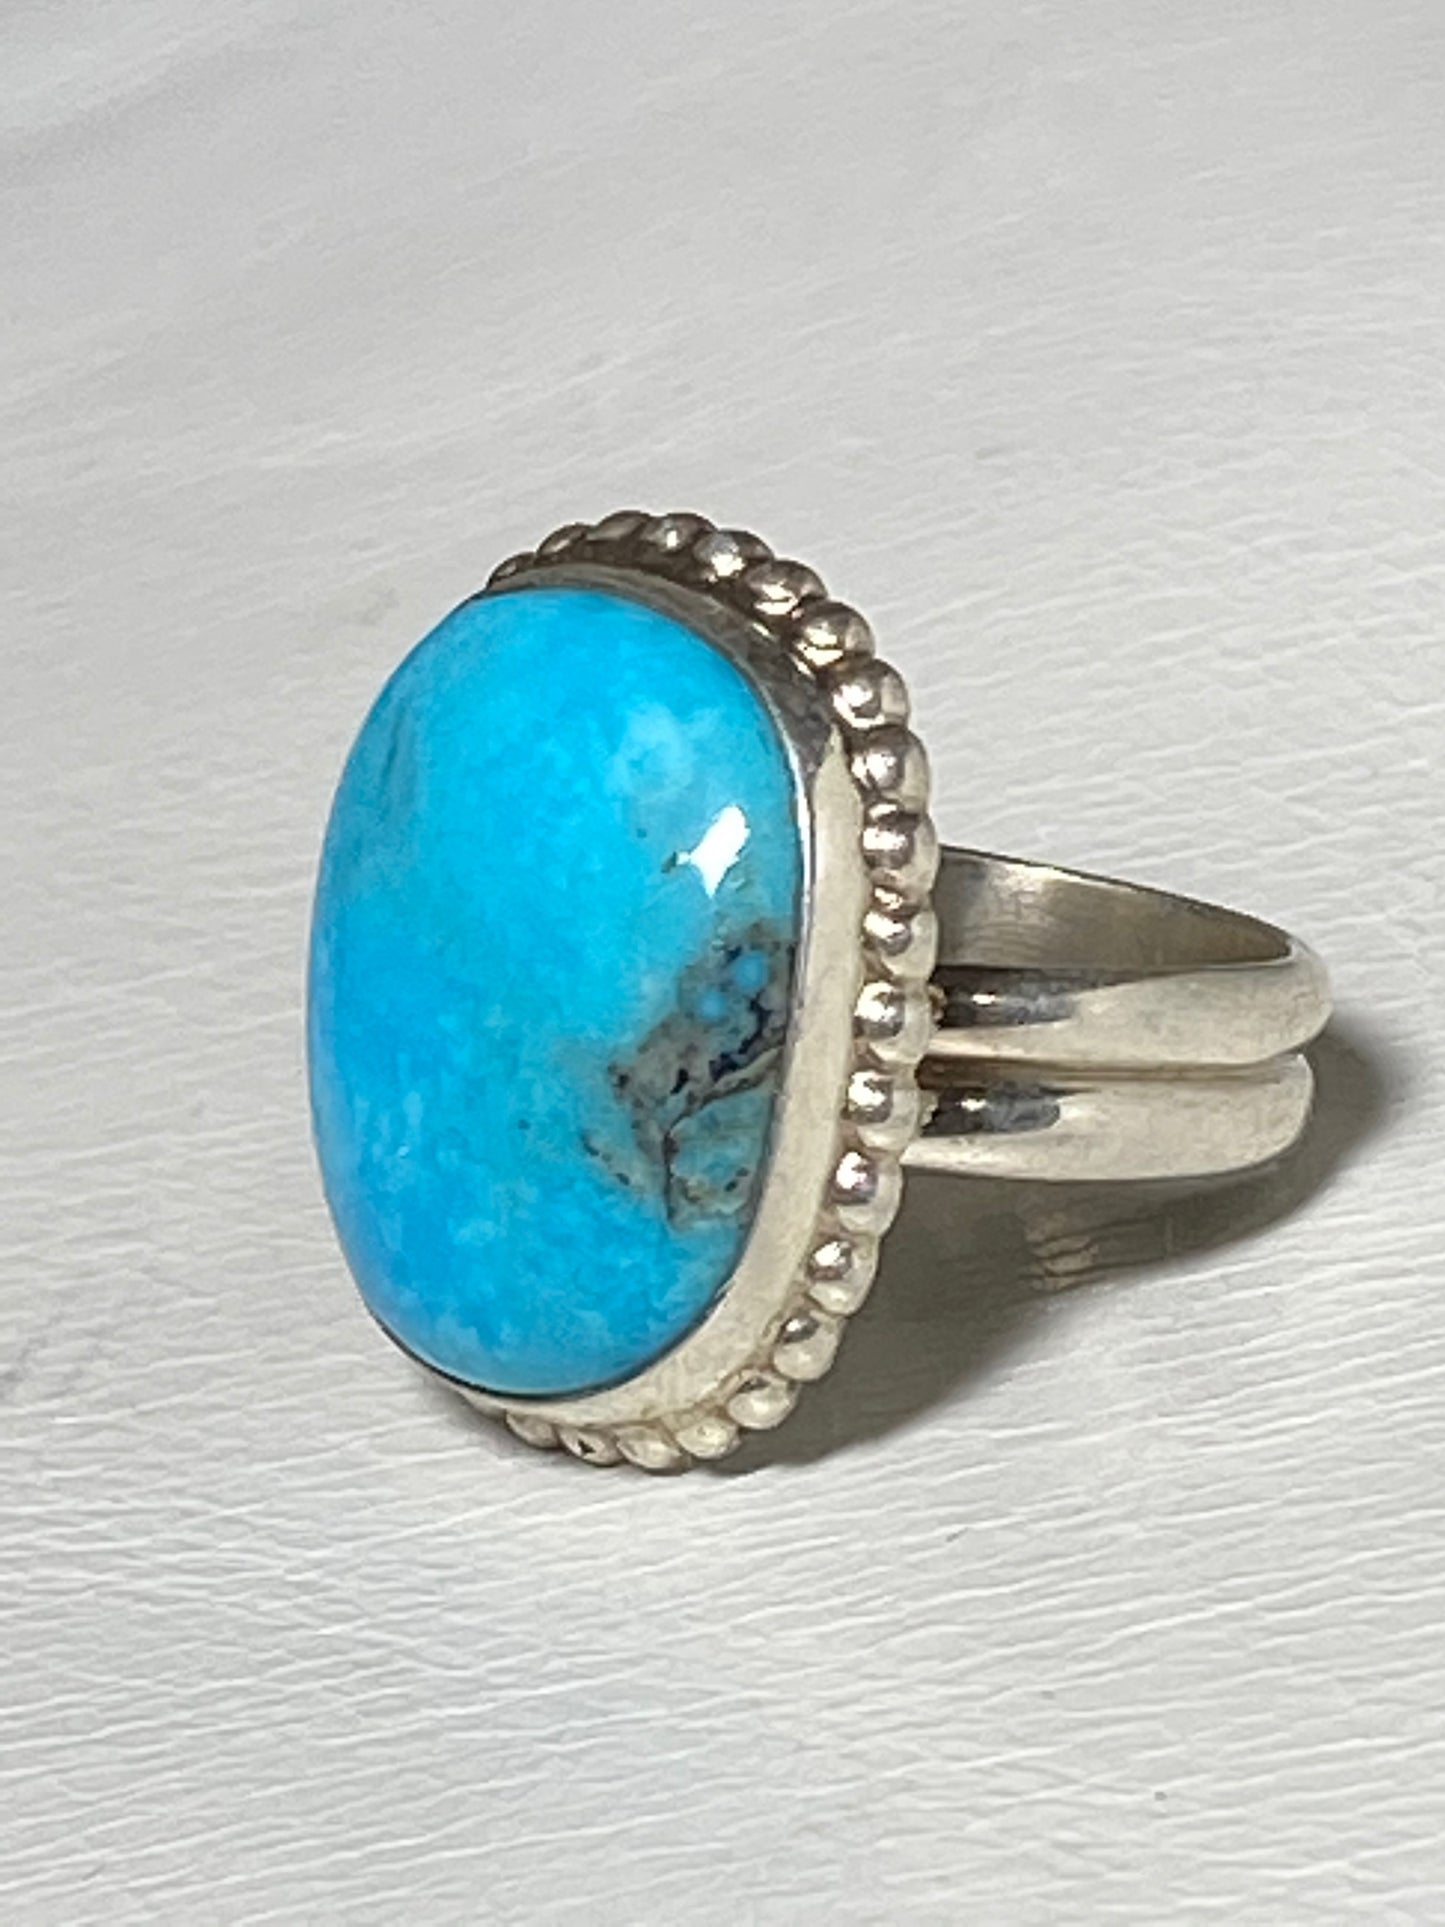 Turquoise ring pinky sterling silver women girls